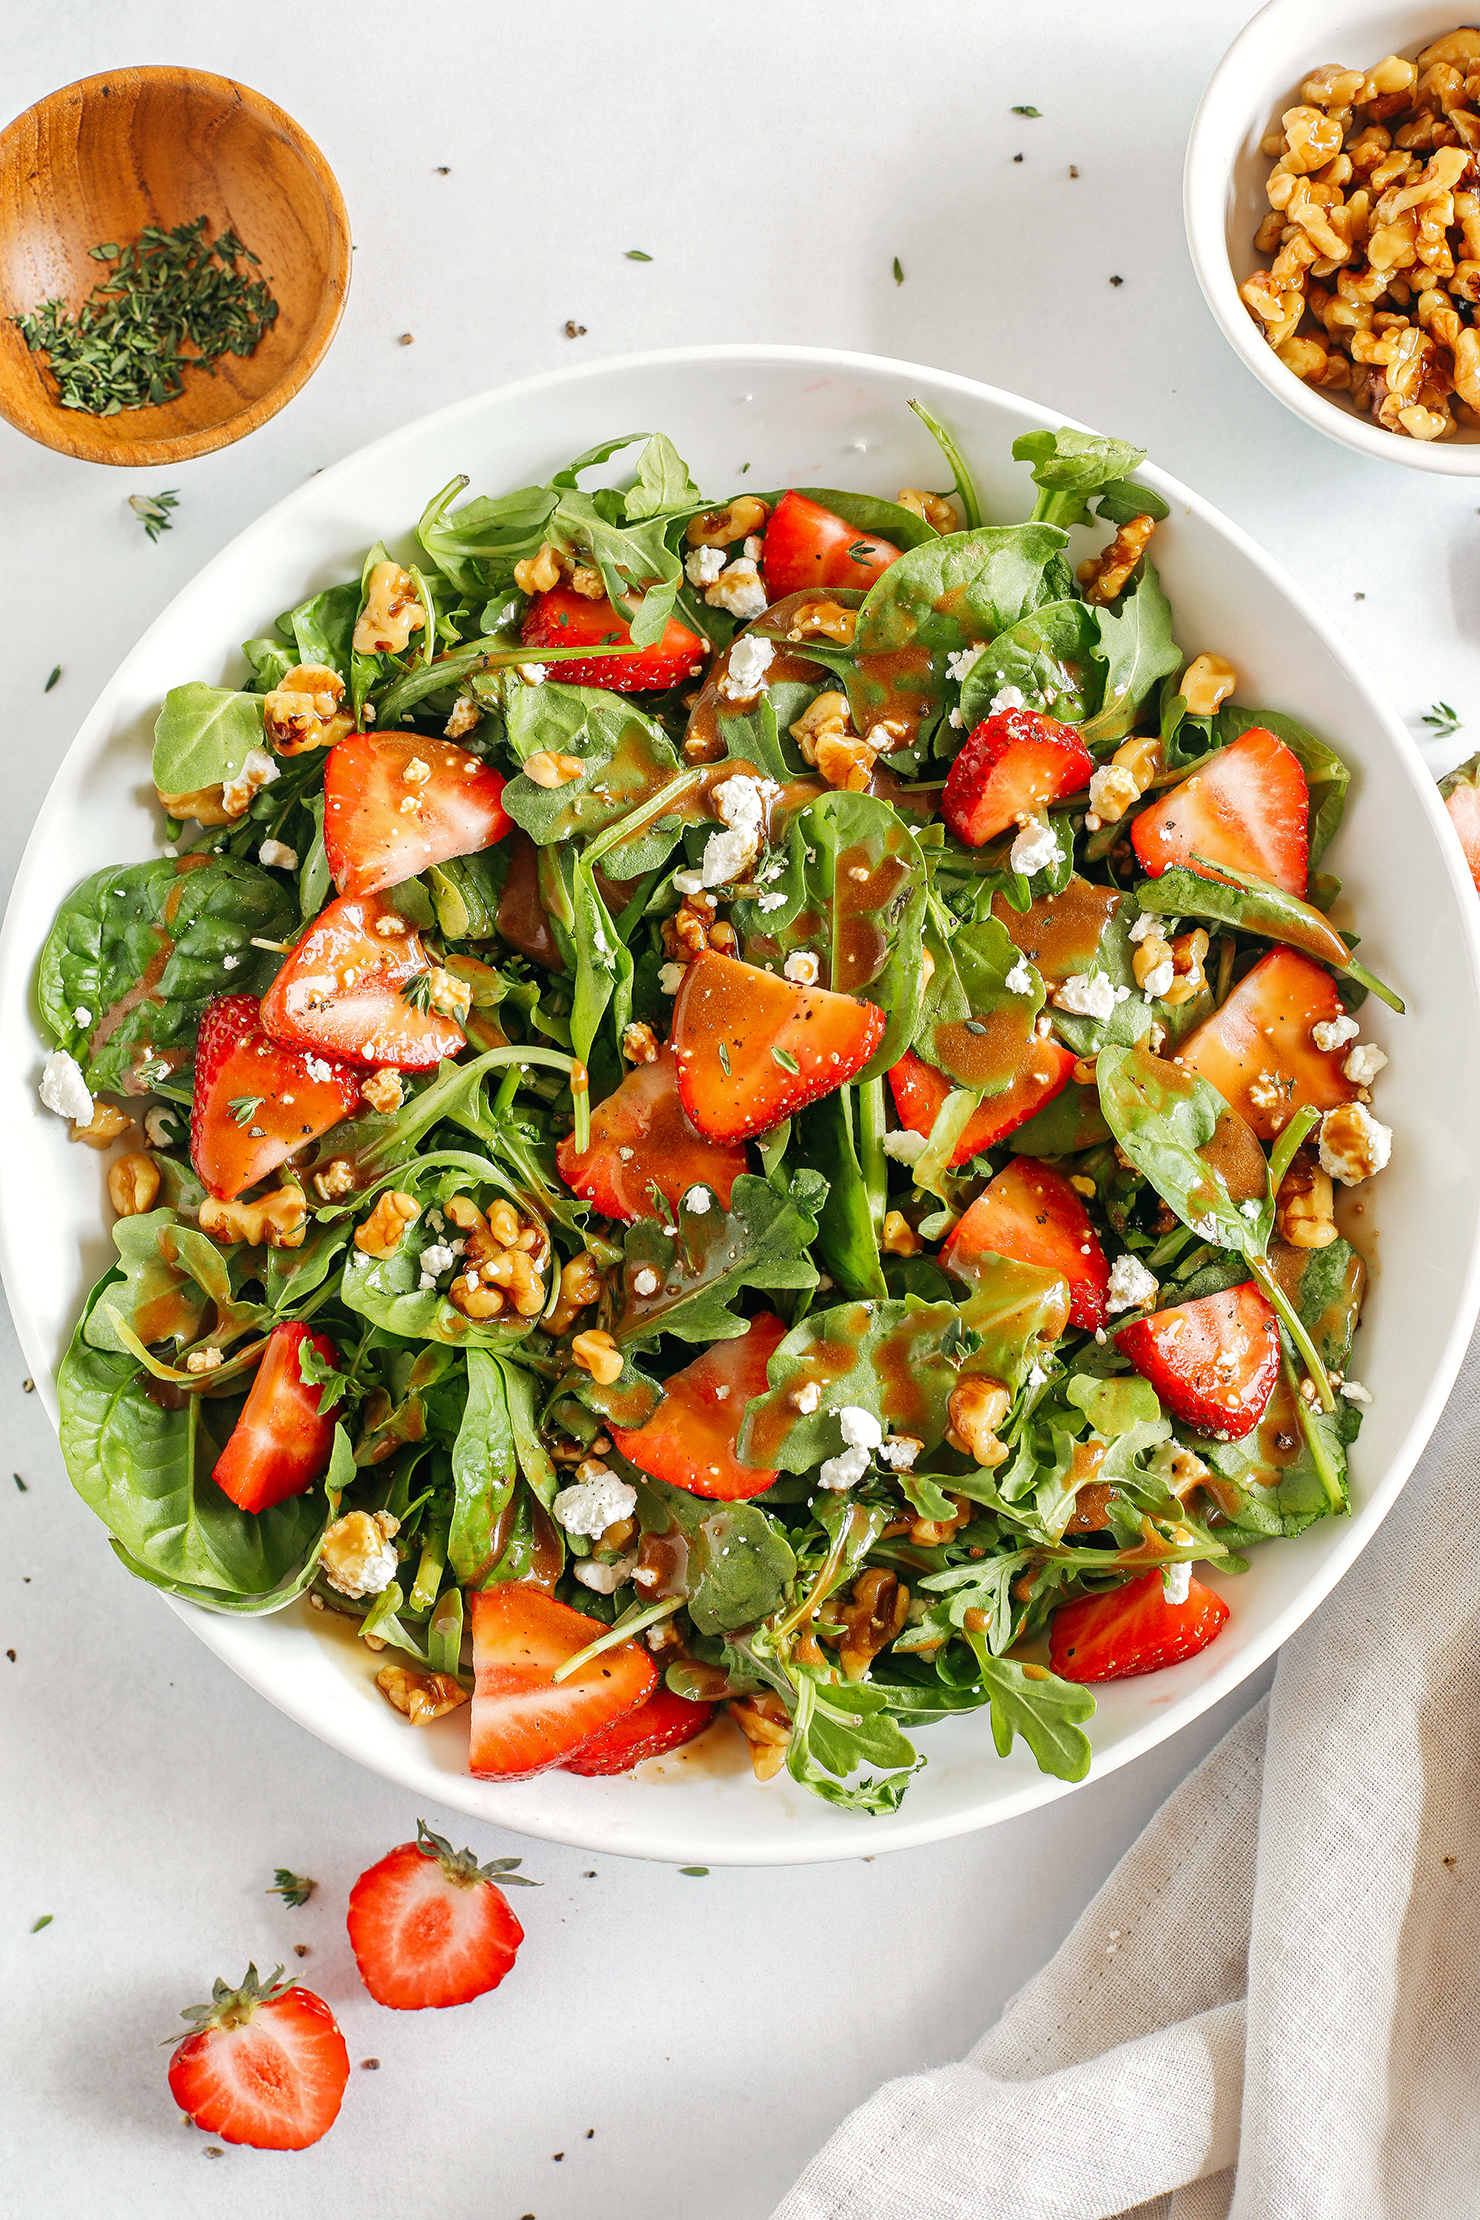 My favorite Strawberry Salad made with leafy greens, fresh strawberries, candied walnuts, and creamy goat cheese all tossed with a rich and tangy maple balsamic dressing!